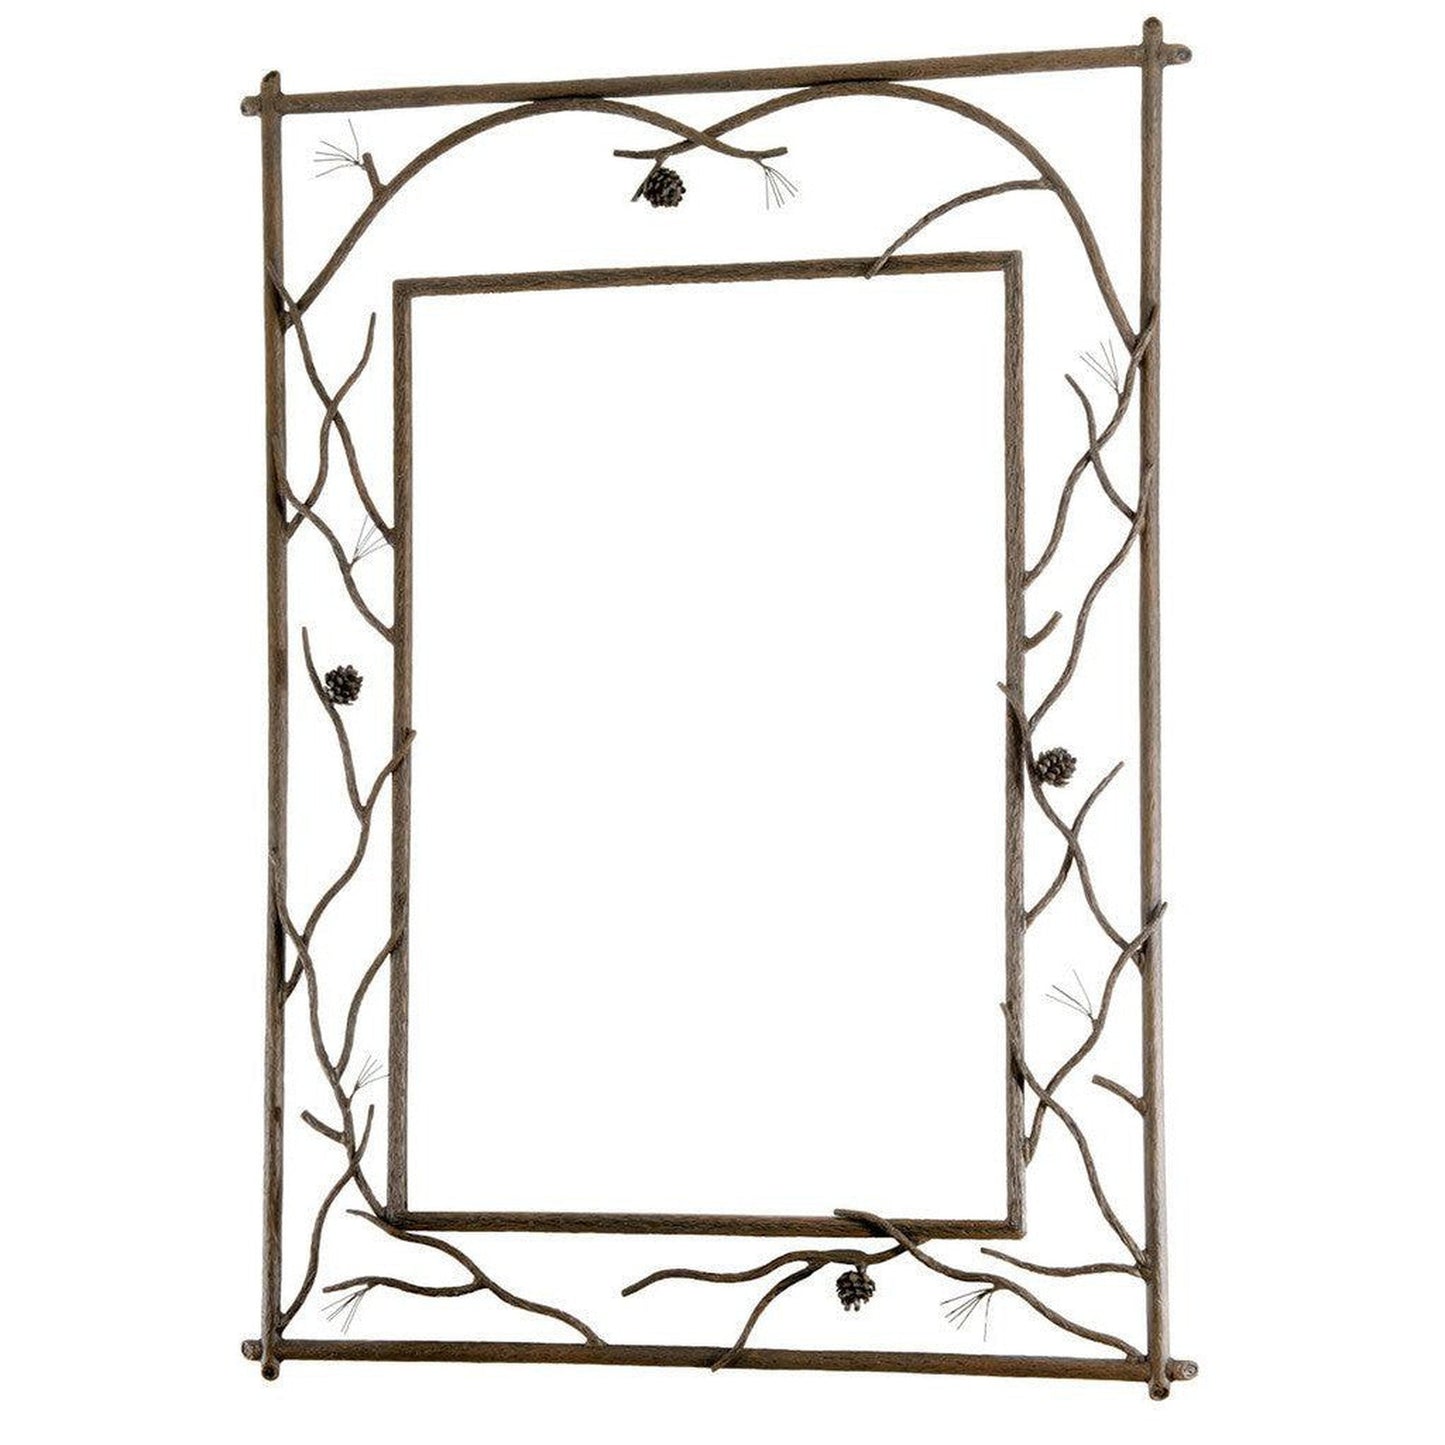 Stone County Ironworks Pine 37" x 51" Large Natural Bark Branched Iron Wall Mirror